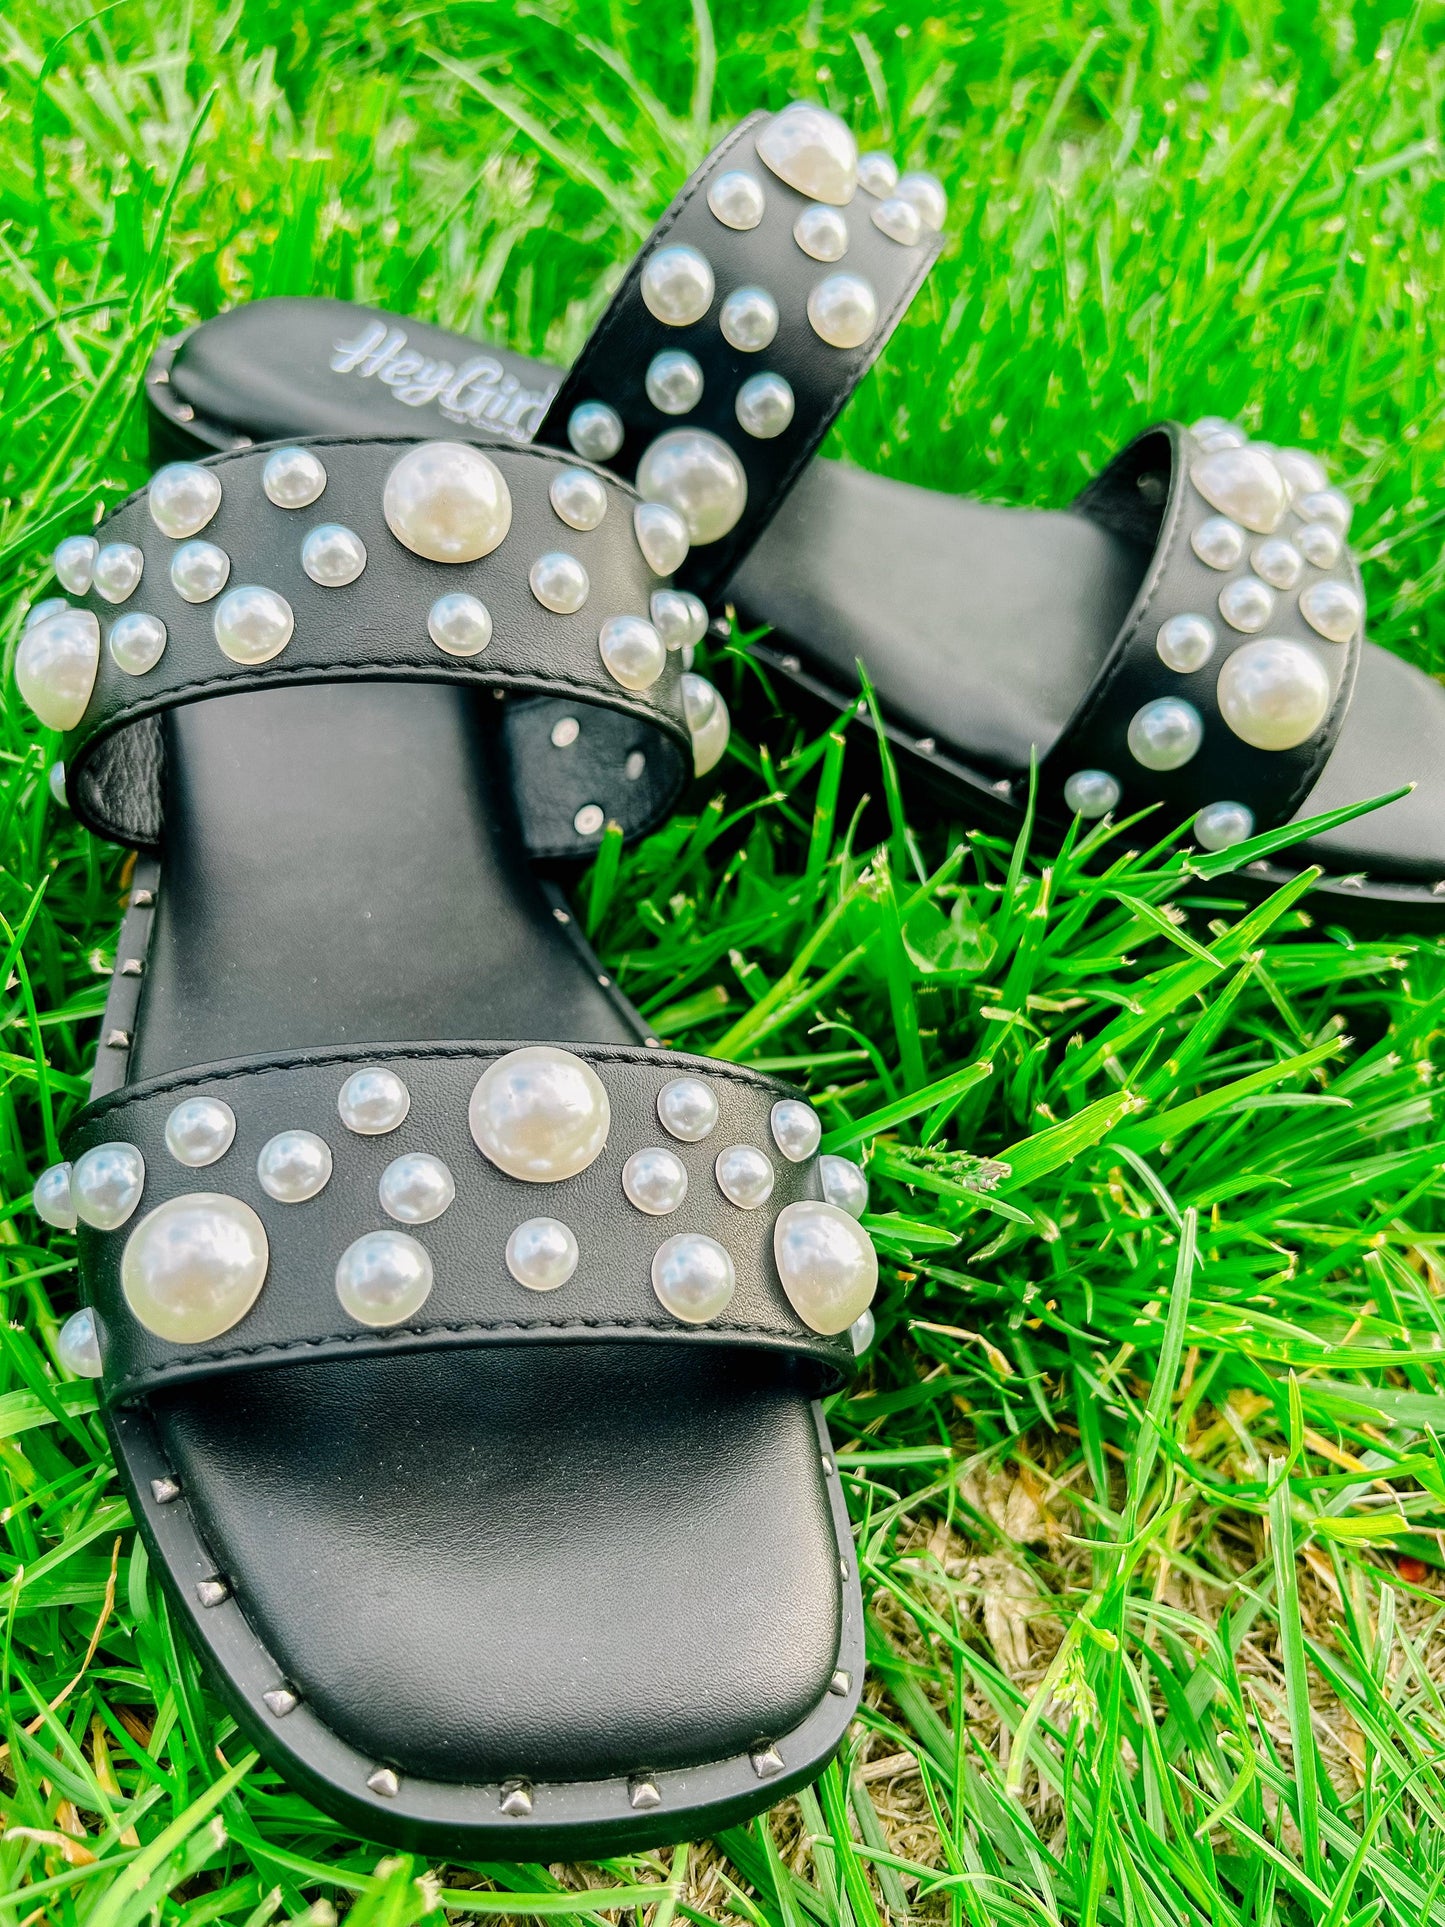 Corky's Marie Pearl Sandals - BeLoved Boutique 